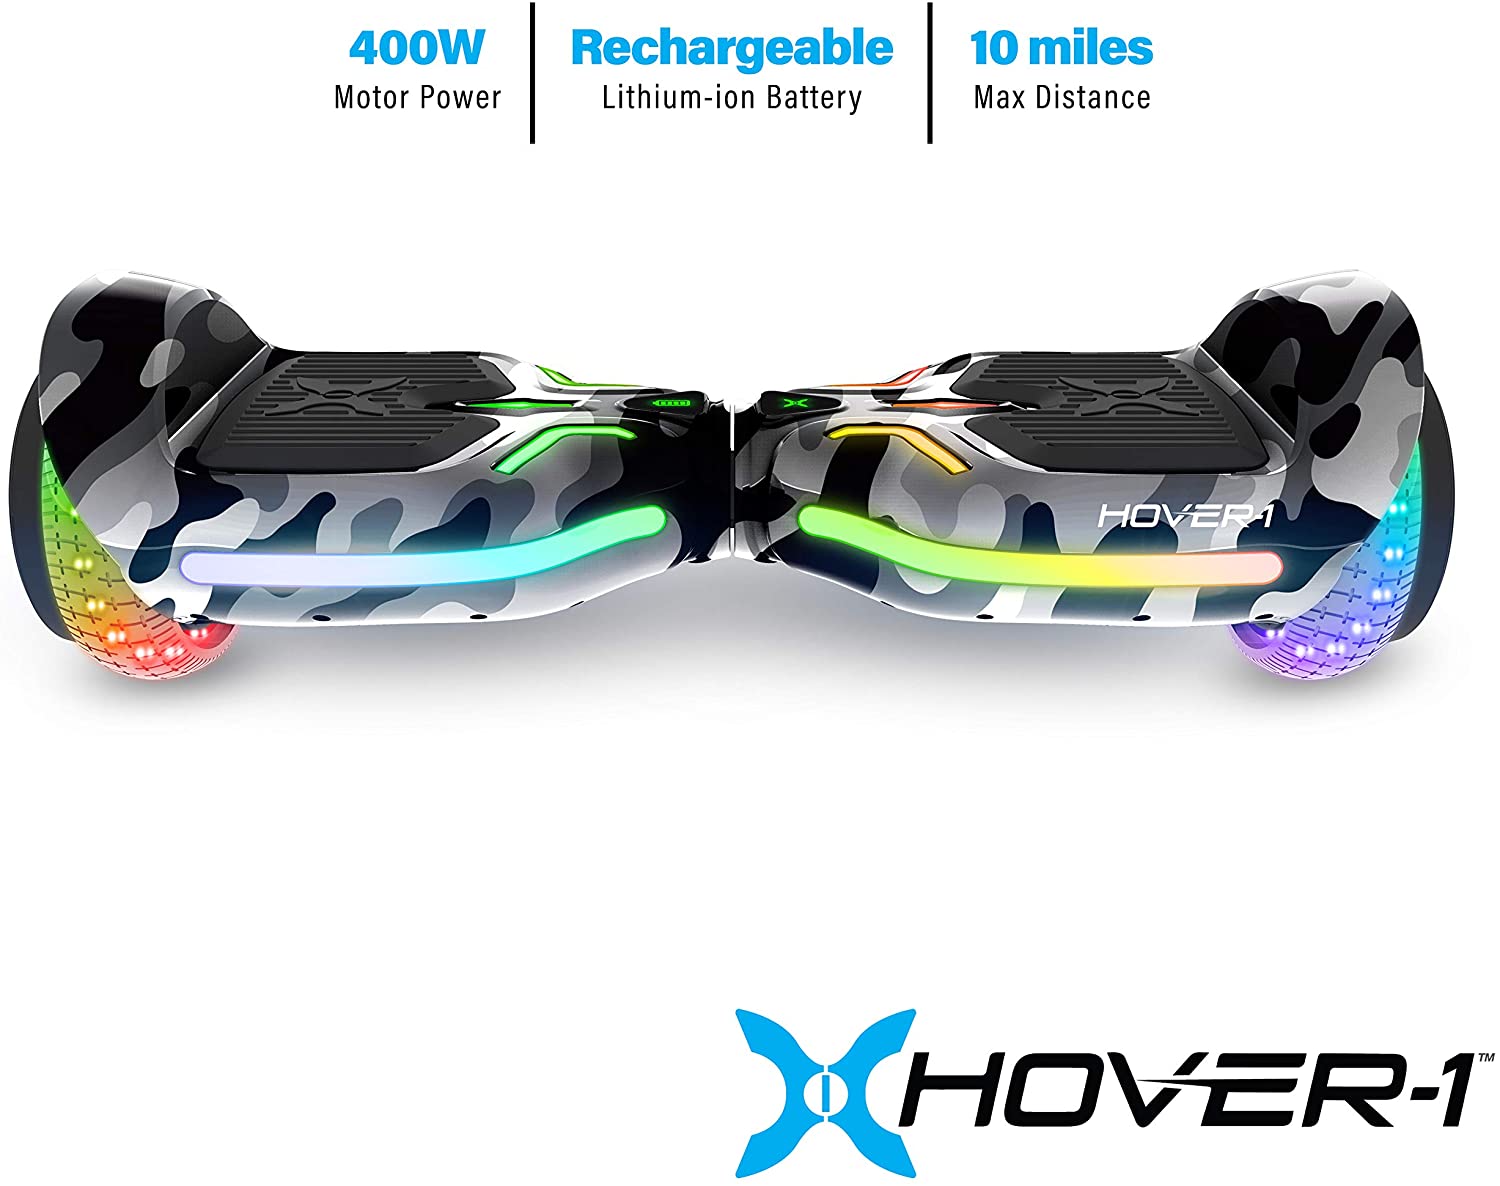 Hover-1 H1-100 Electric Hoverboard Scooter with Infinity LED Wheel Lights - image 3 of 8